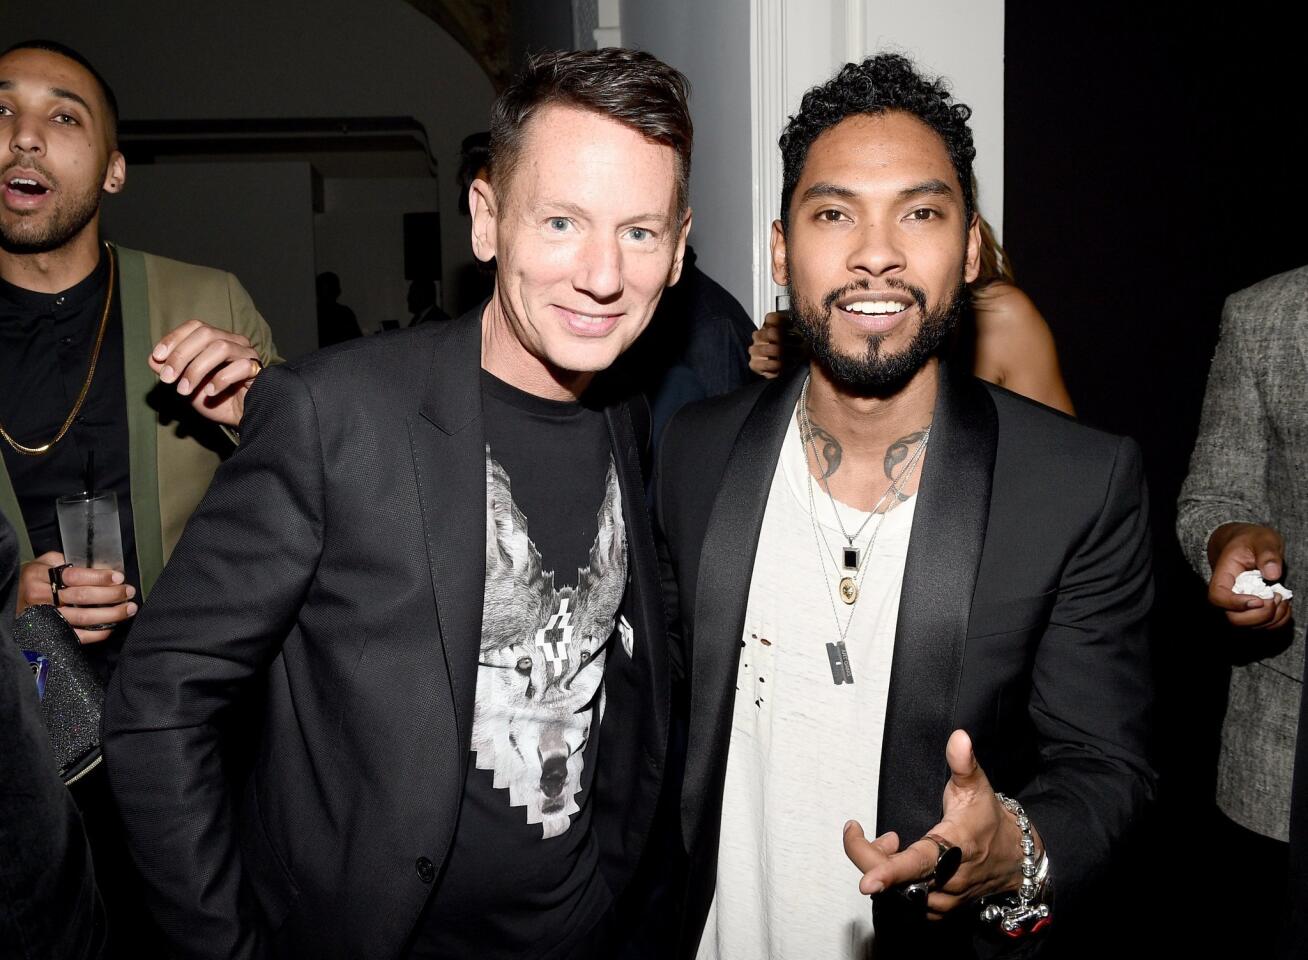 GQ Editor in Chief Jim Nelson and recording artist Miguel attend the GQ and Giorgio Armani Grammys after-party at Hollywood Athletic Club.